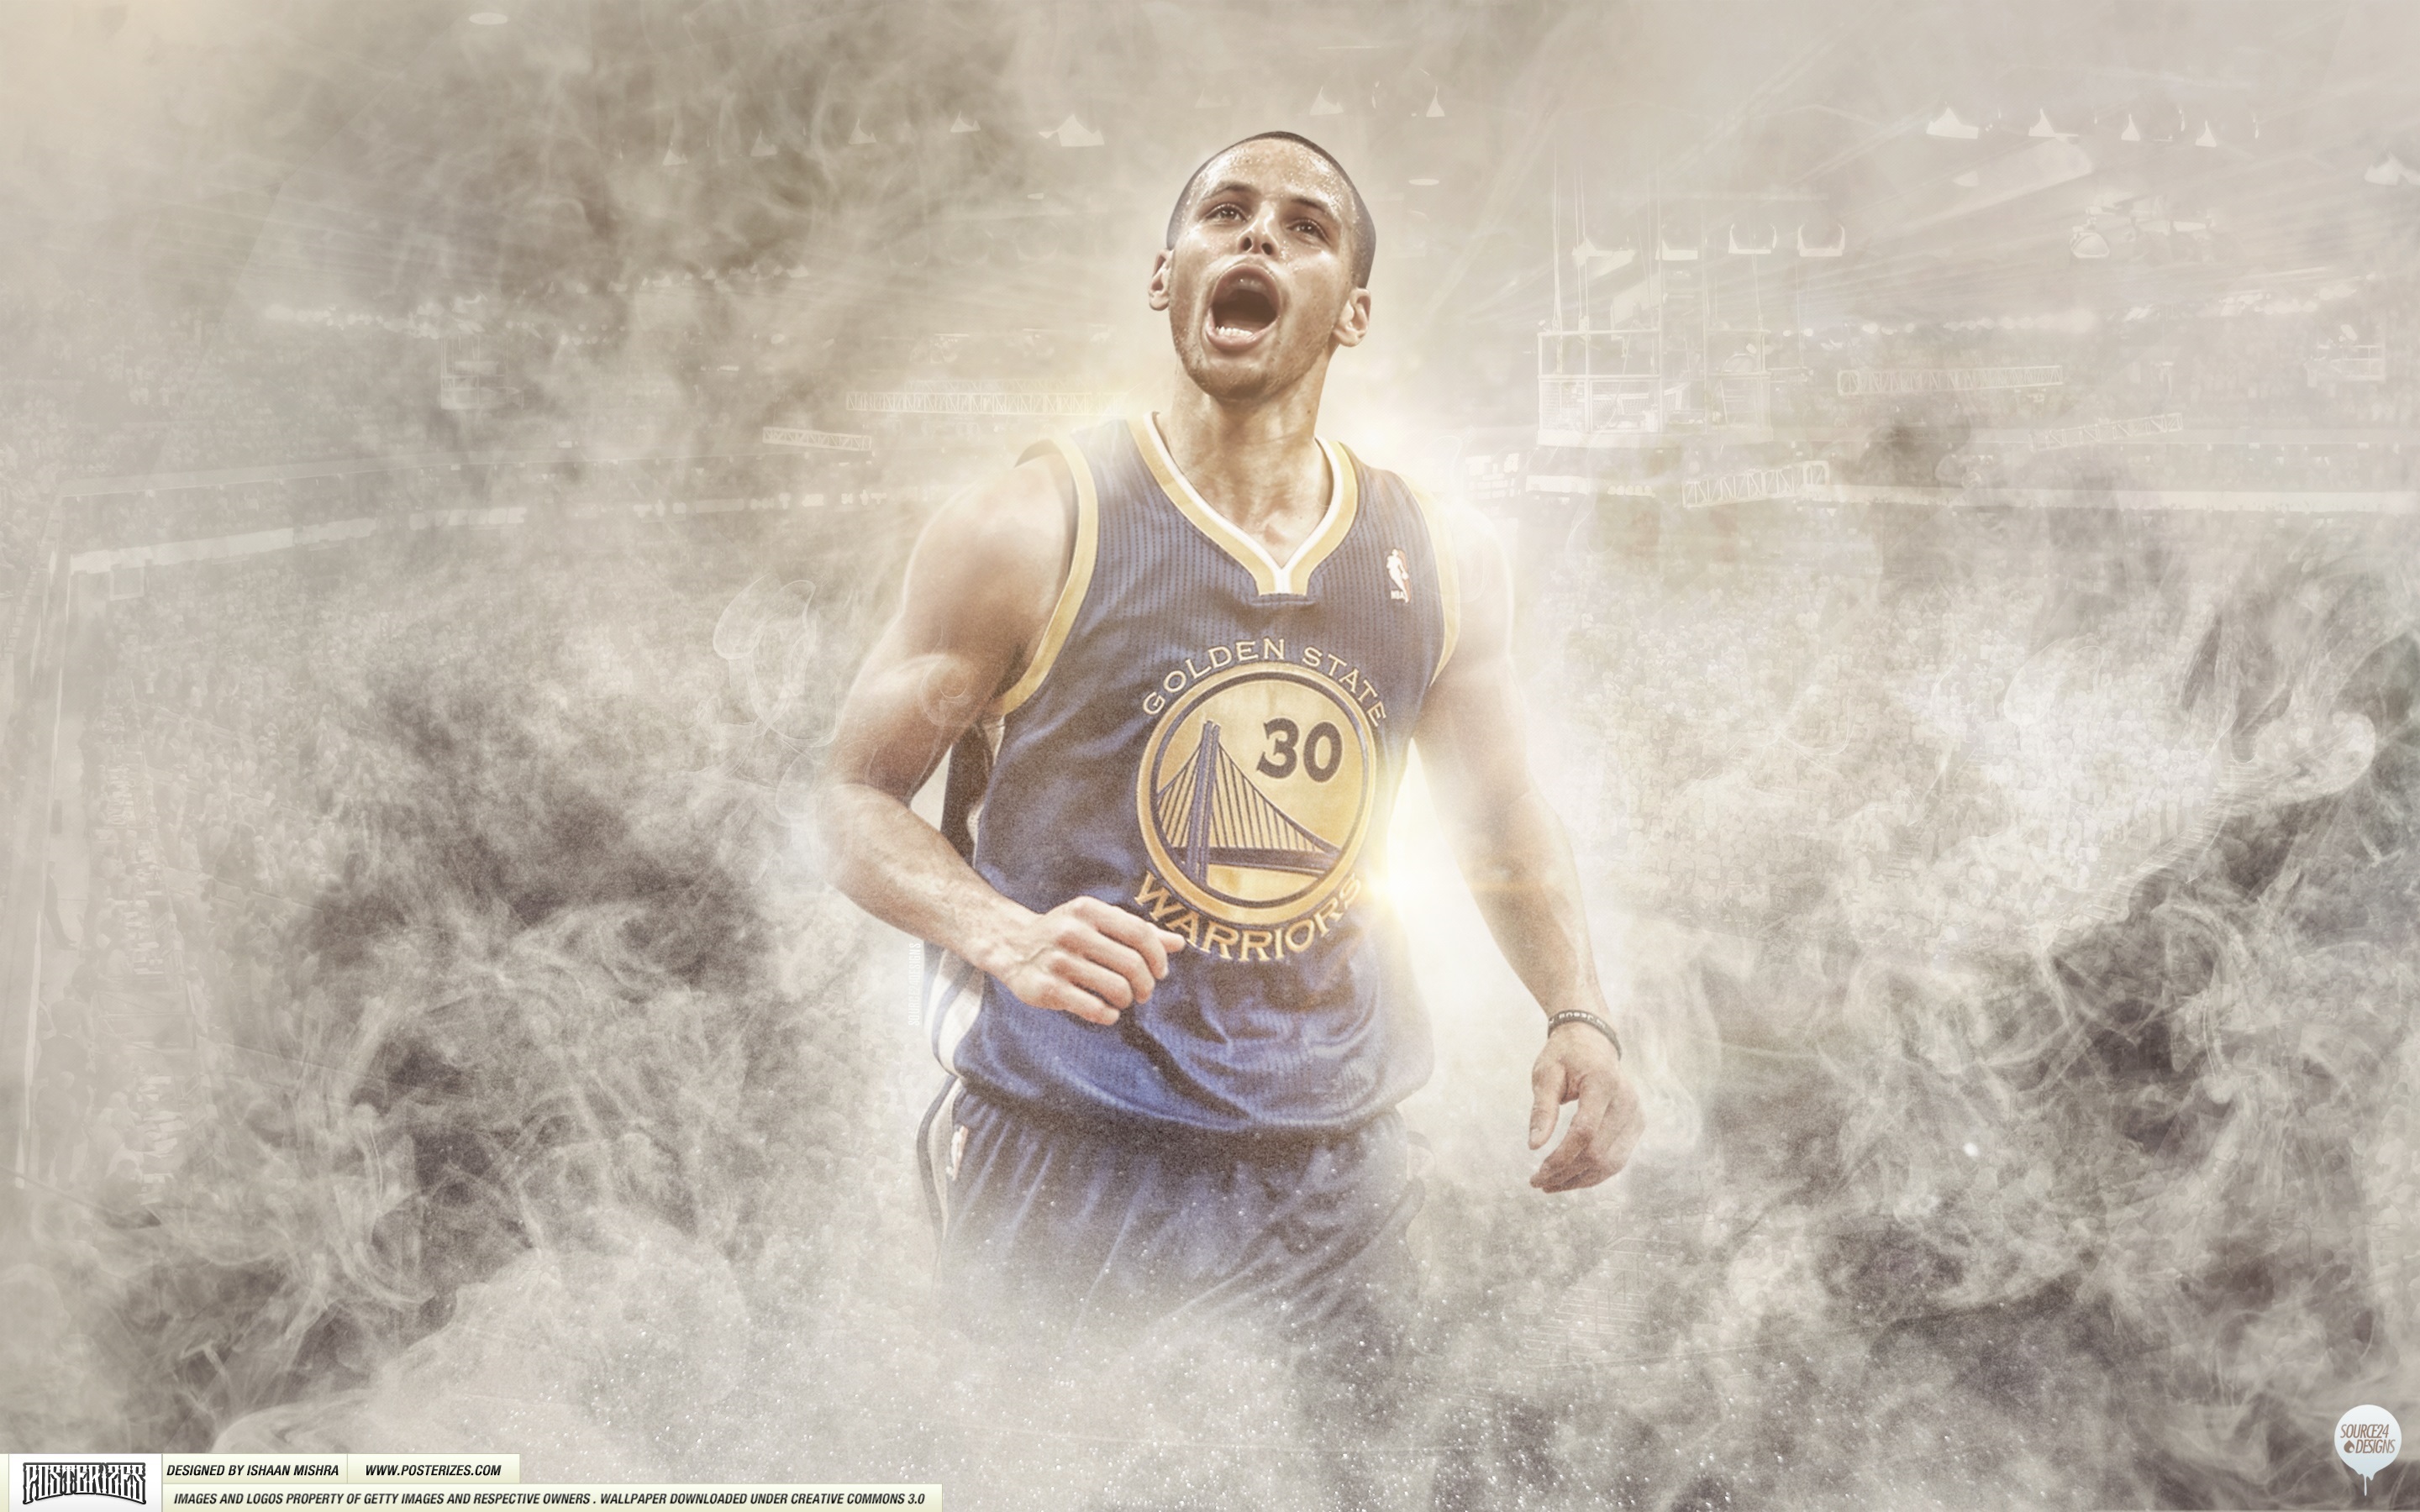 Steph Curry Wallpaper by IshaanMishra on DeviantArt